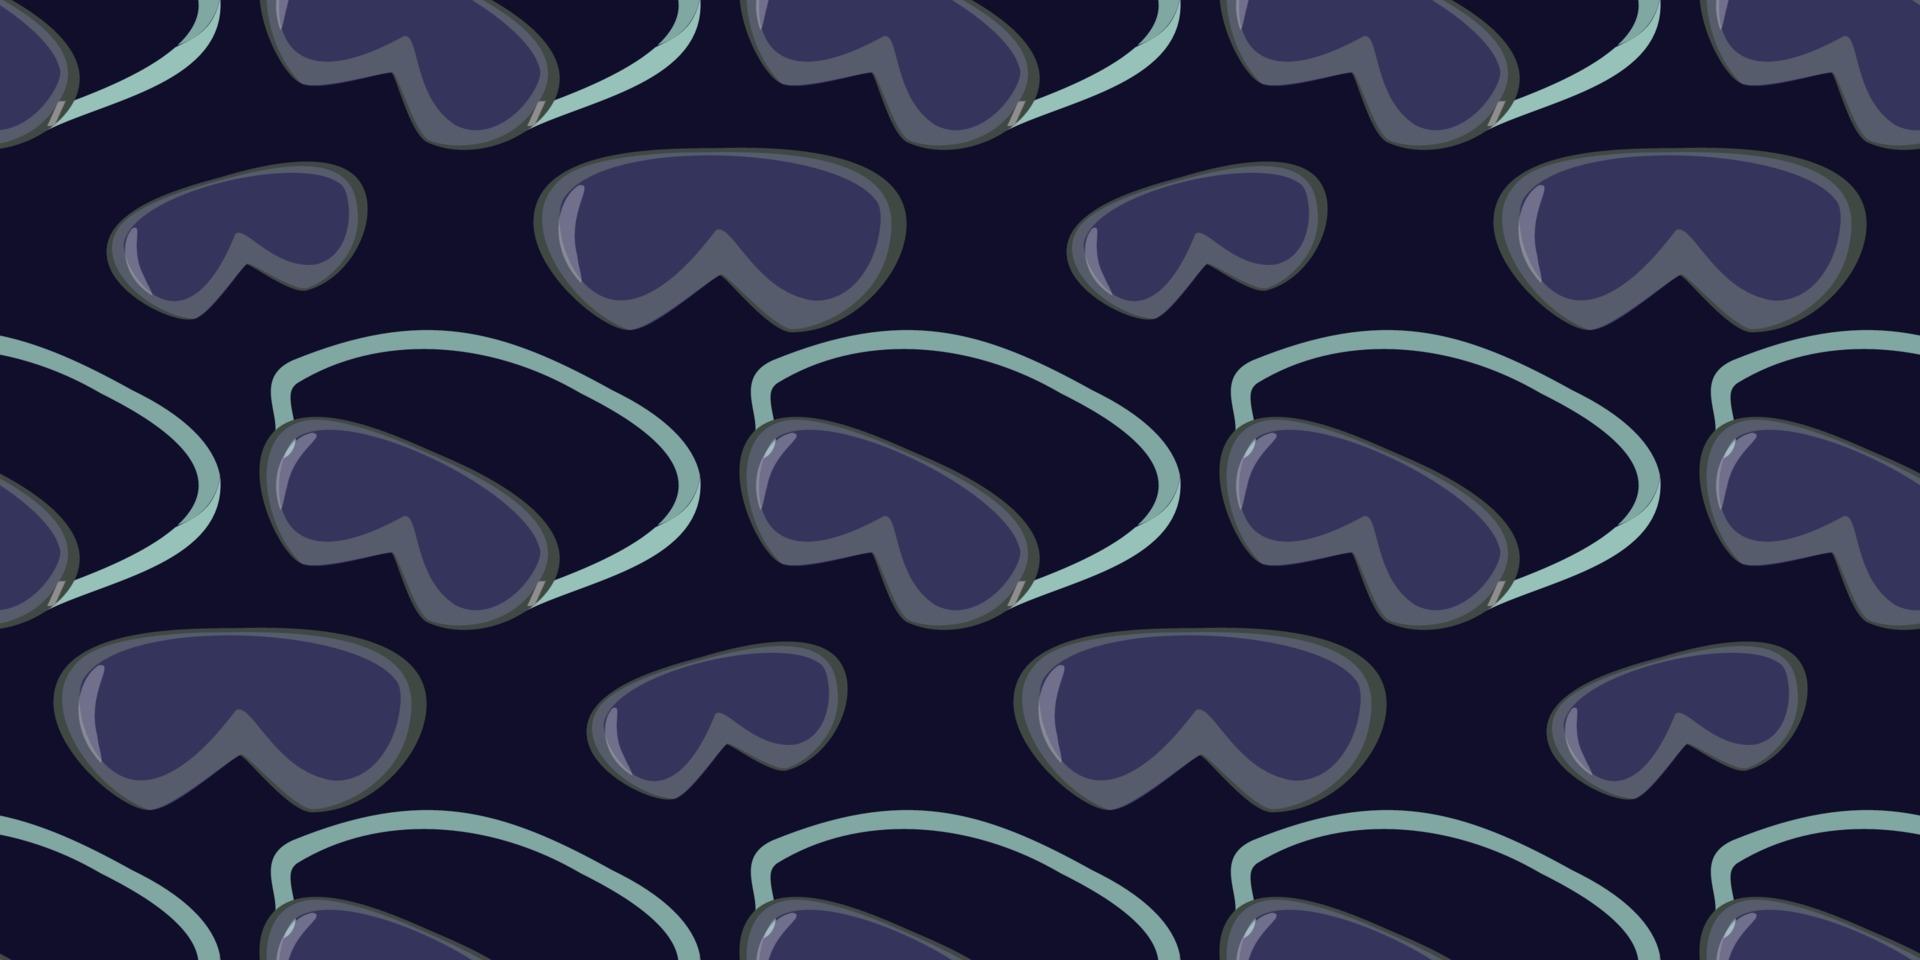 Seamless vector pattern of  Safety Goggle isolated on dark blue background. Medicine creative concepts. illustration for pharmaceutical industry.